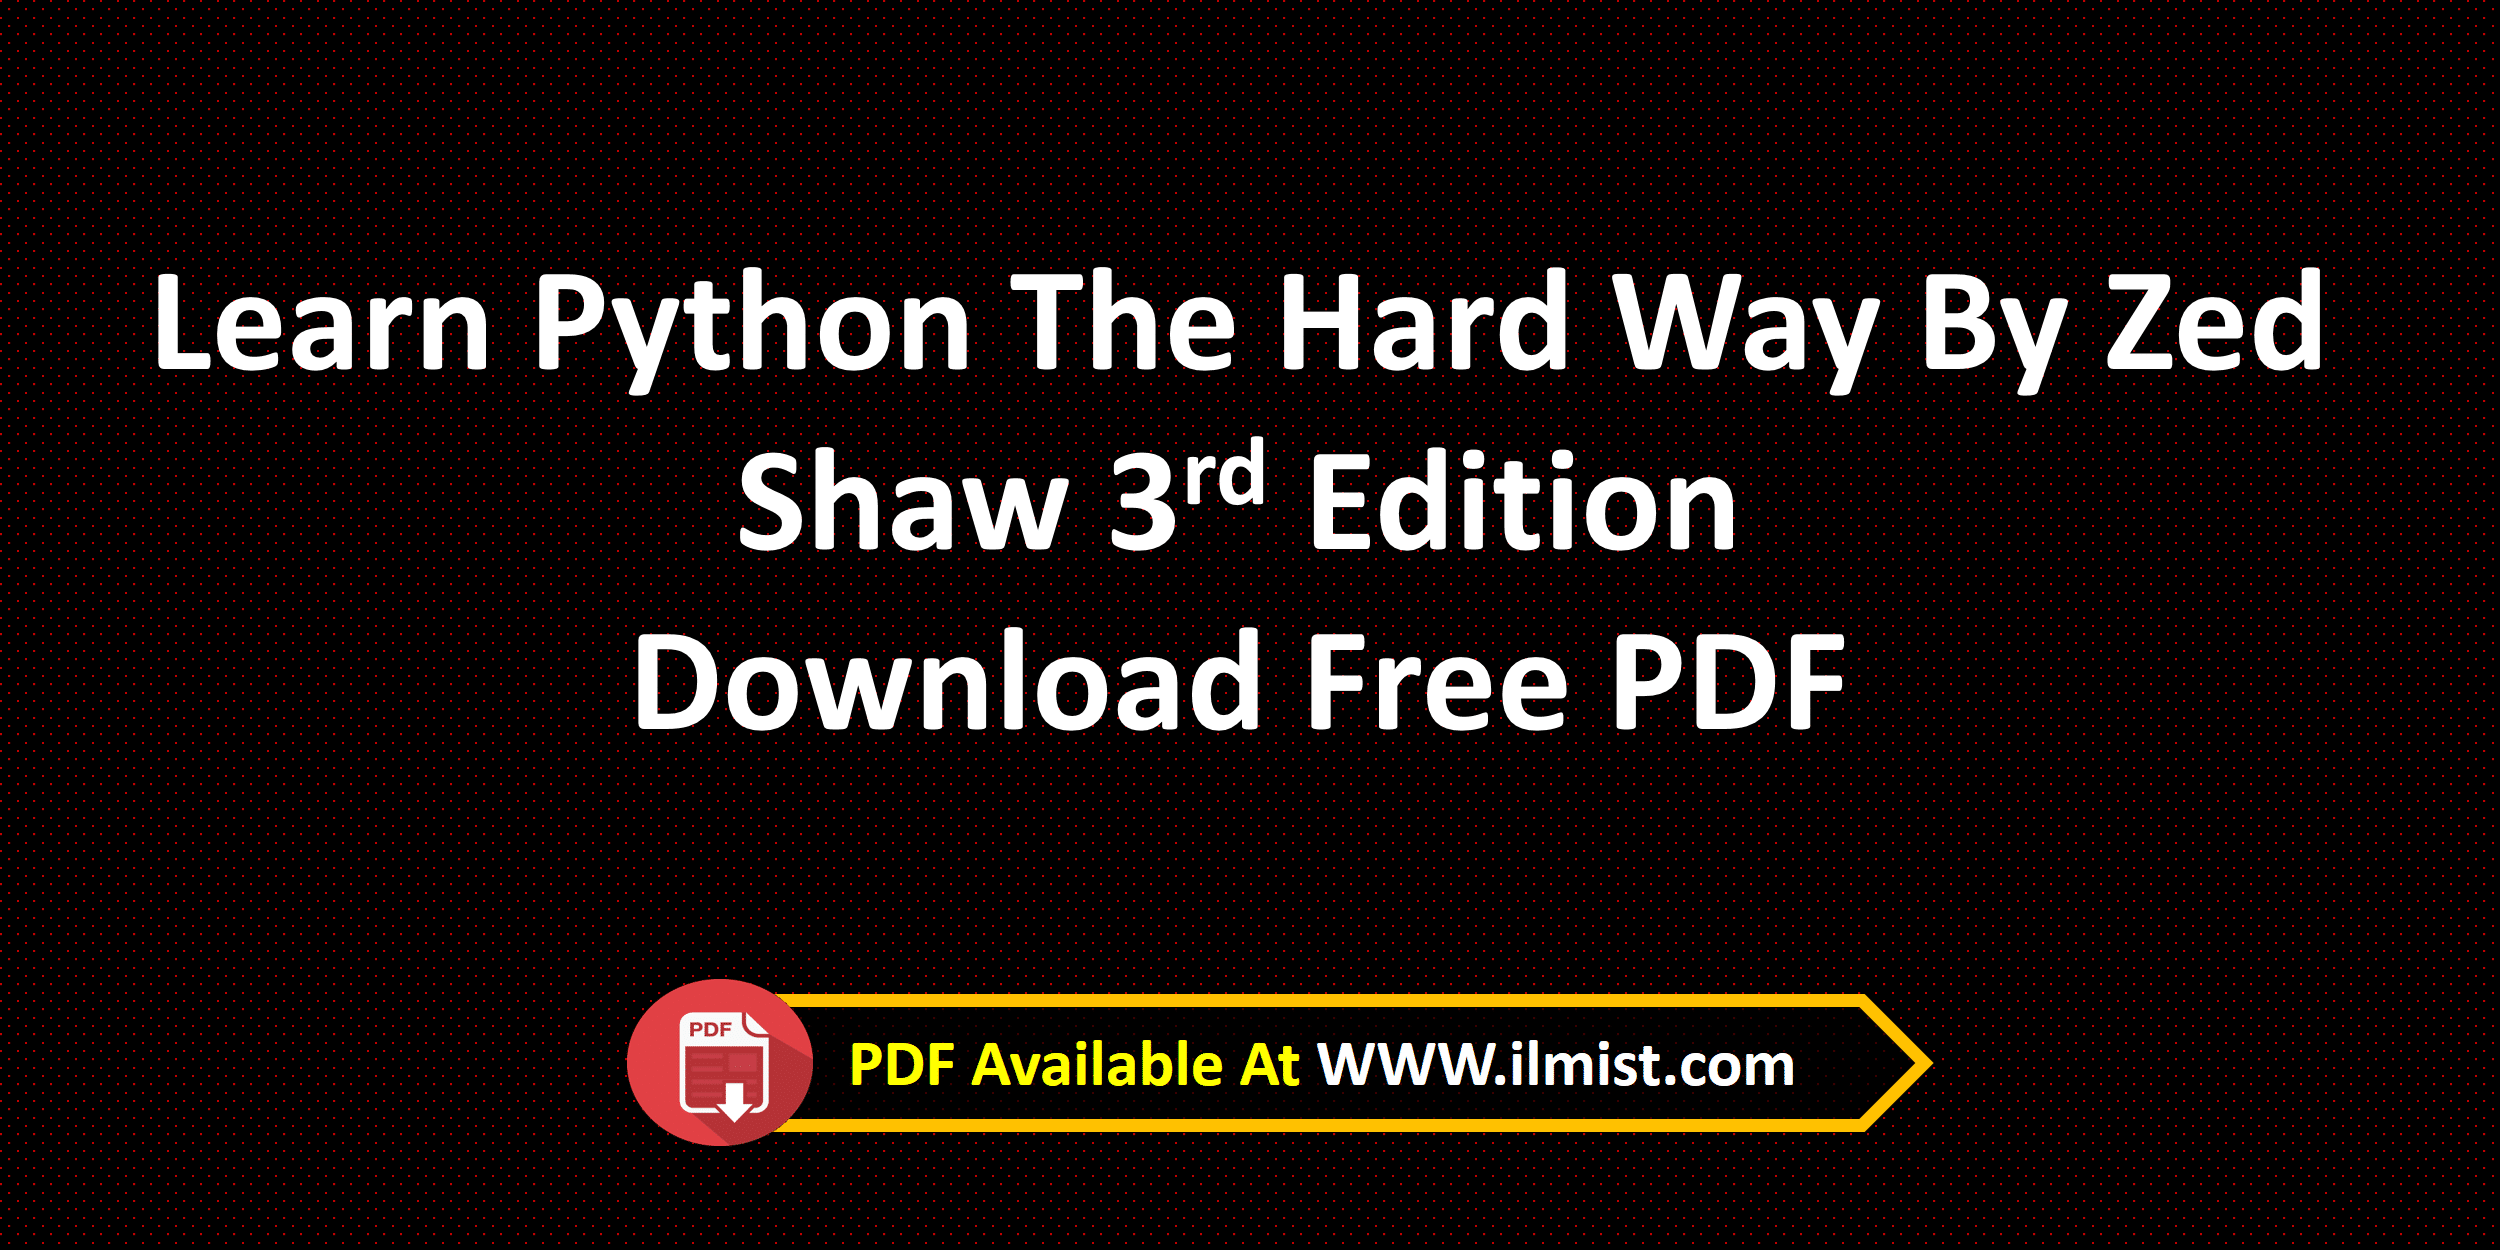 Learn Python The Hardway